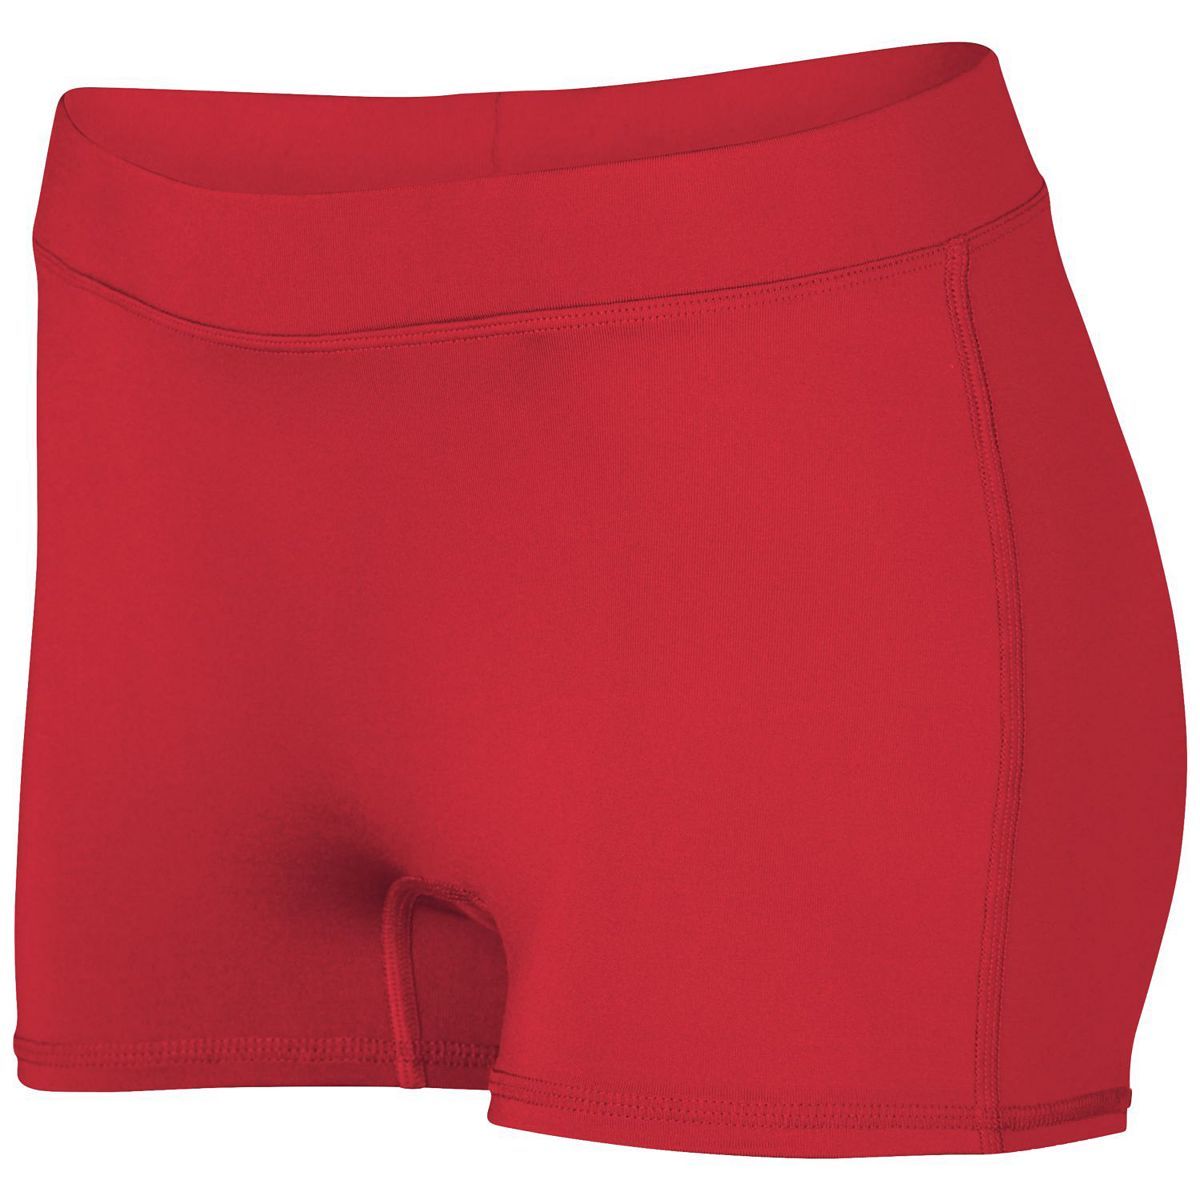 Augusta Sportswear Girls Dare Shorts in Red  -Part of the Girls, Augusta-Products, Volleyball, Girls-Shorts product lines at KanaleyCreations.com